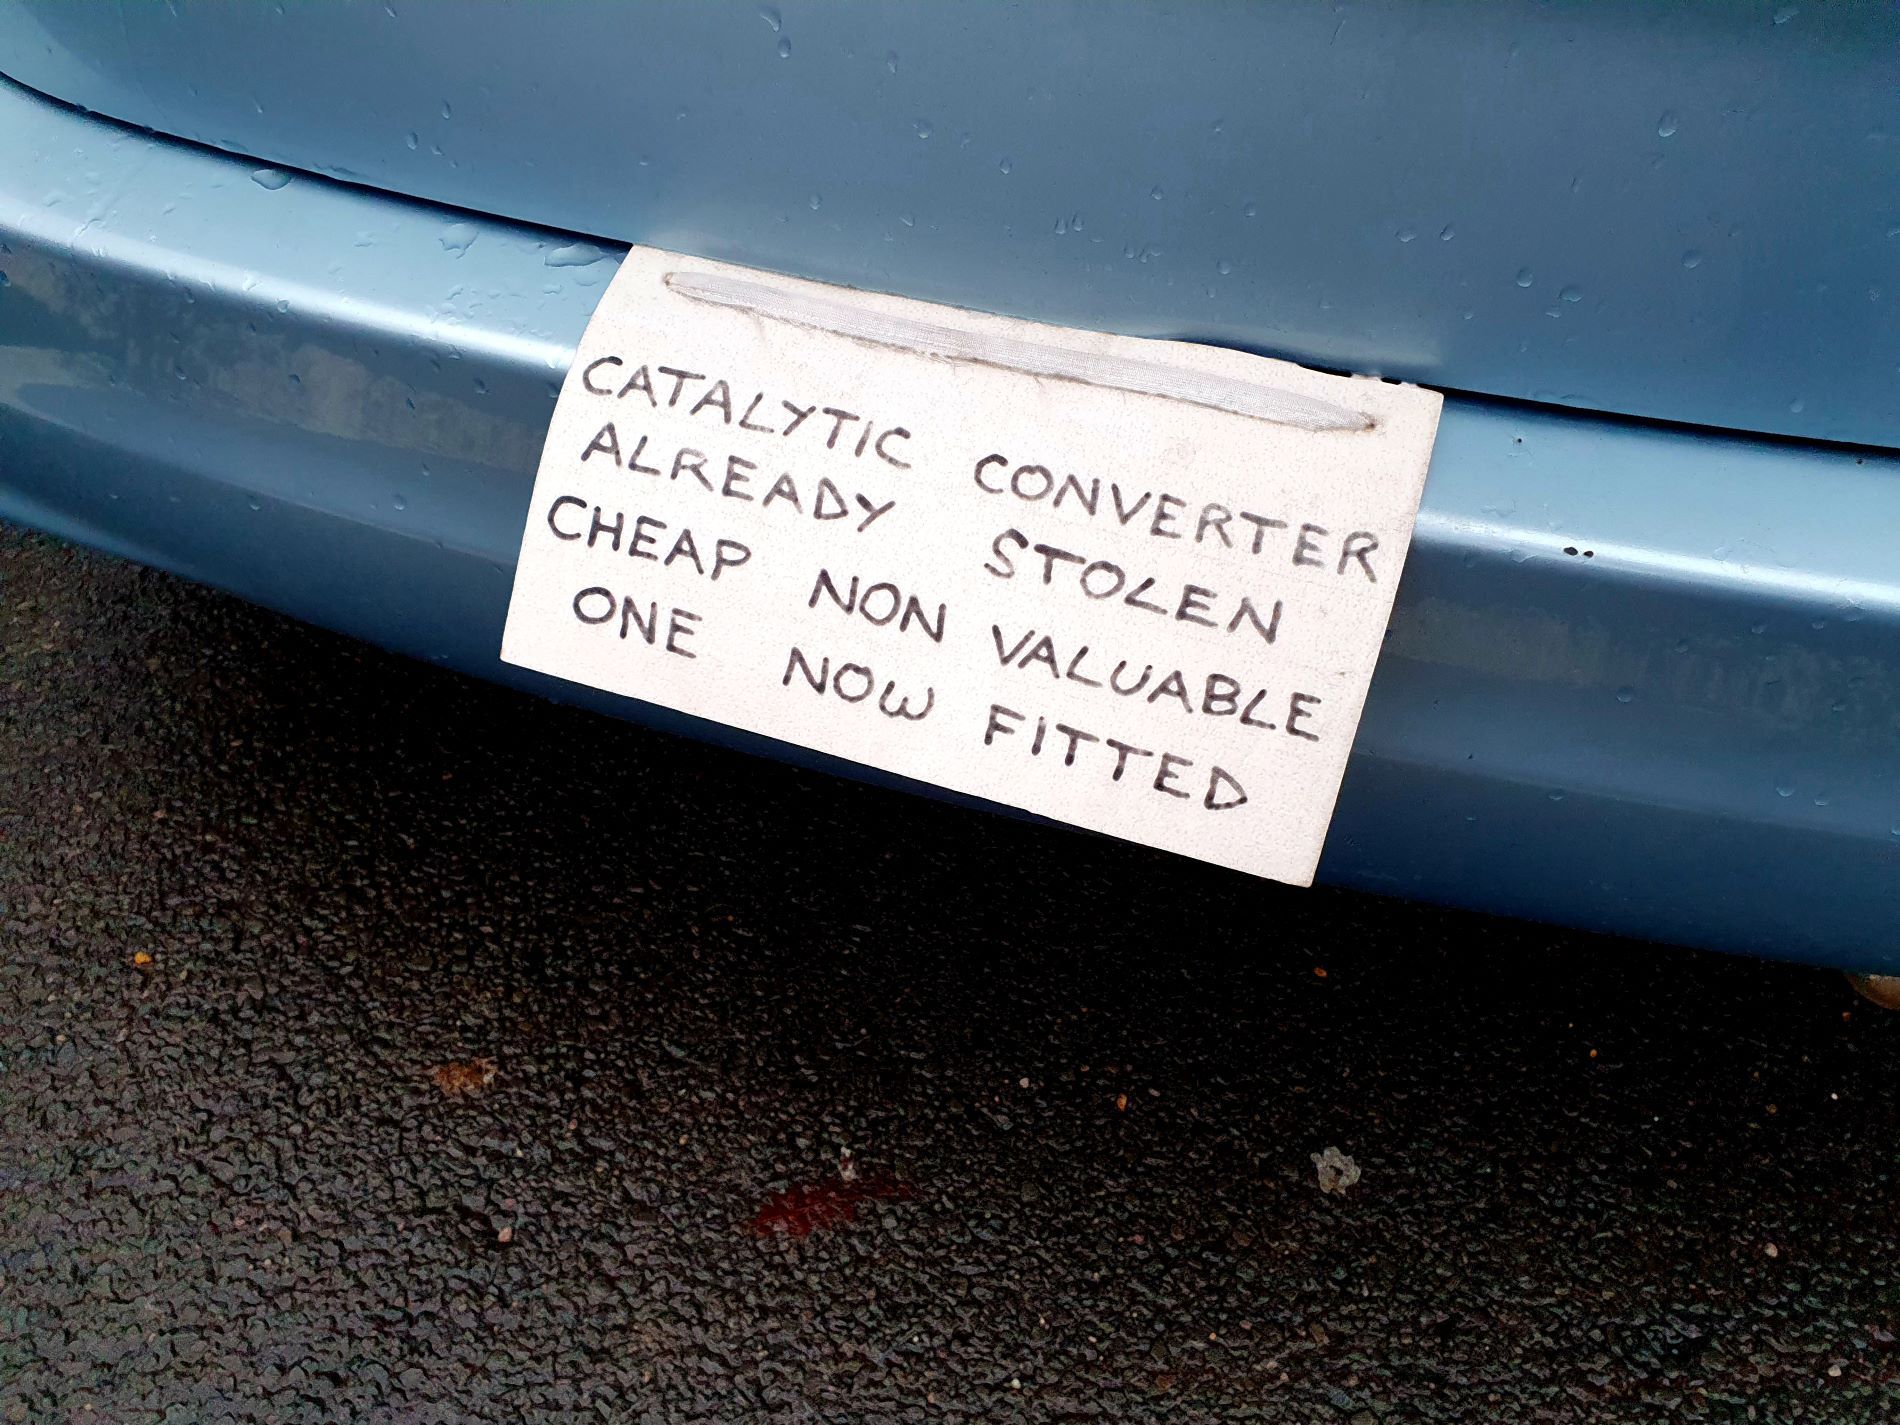 expensive catalytic converters, diesel converters, hybrid vehicles, electric vehicles, Most expensive catalytic converters, stealing converters.